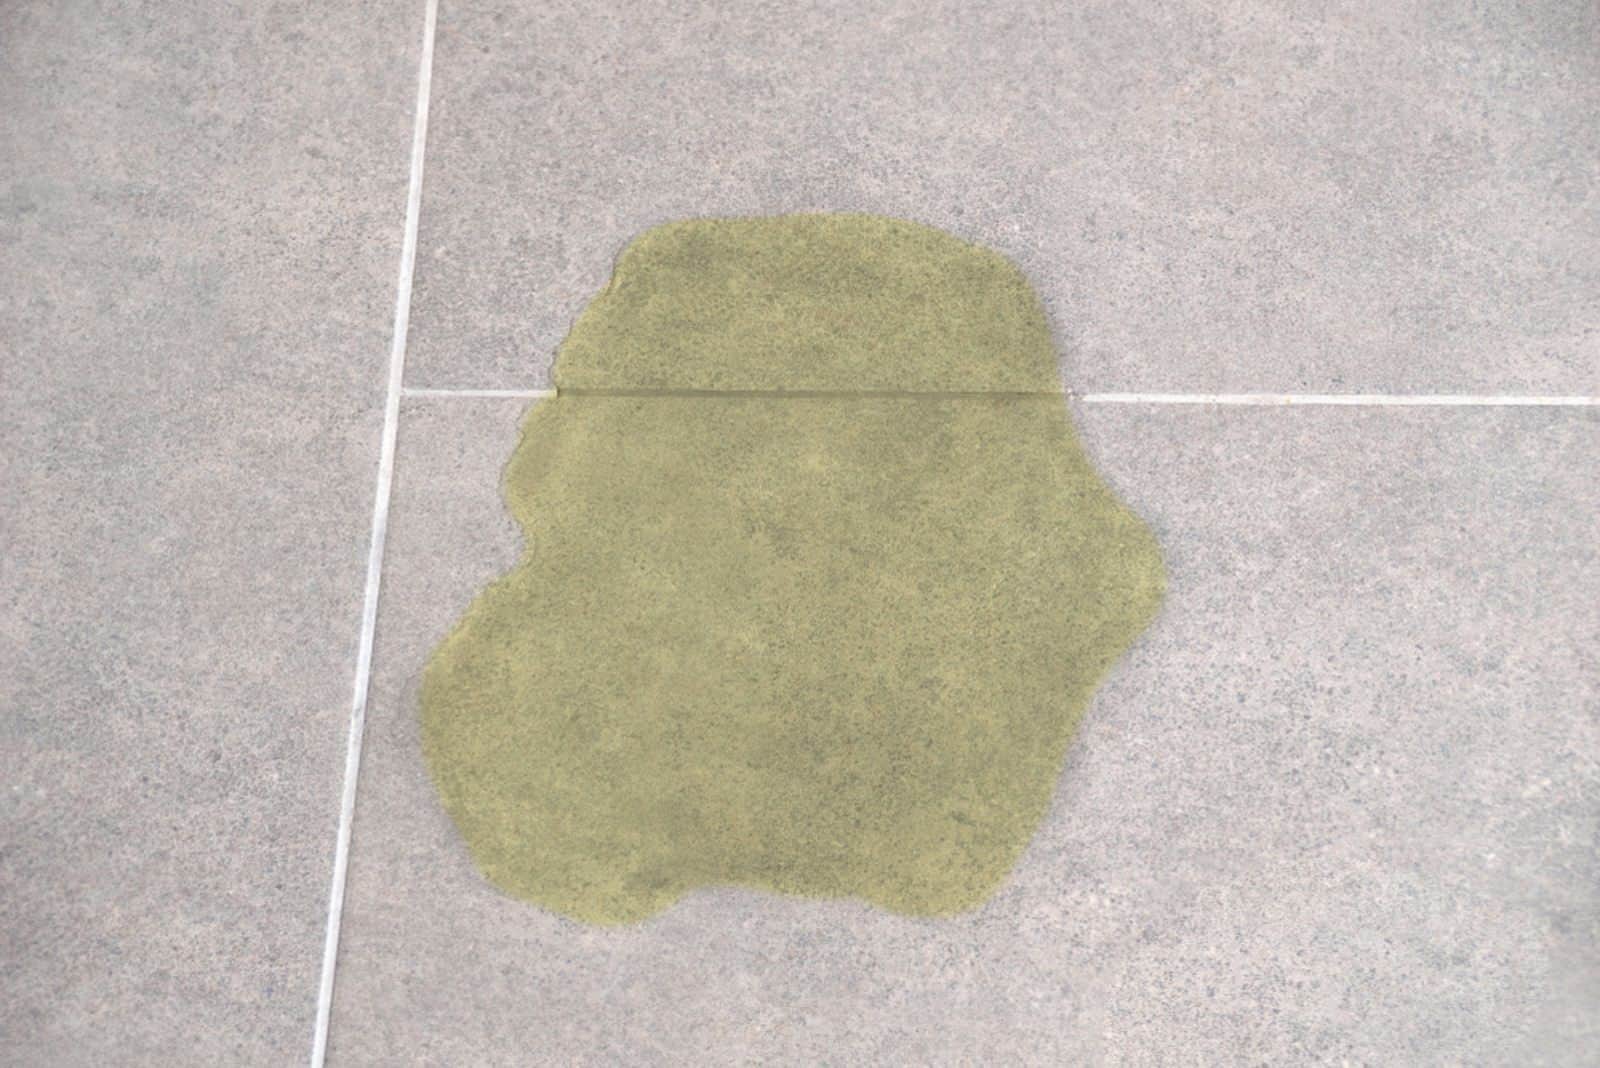 urine of a dog on the floor of a house